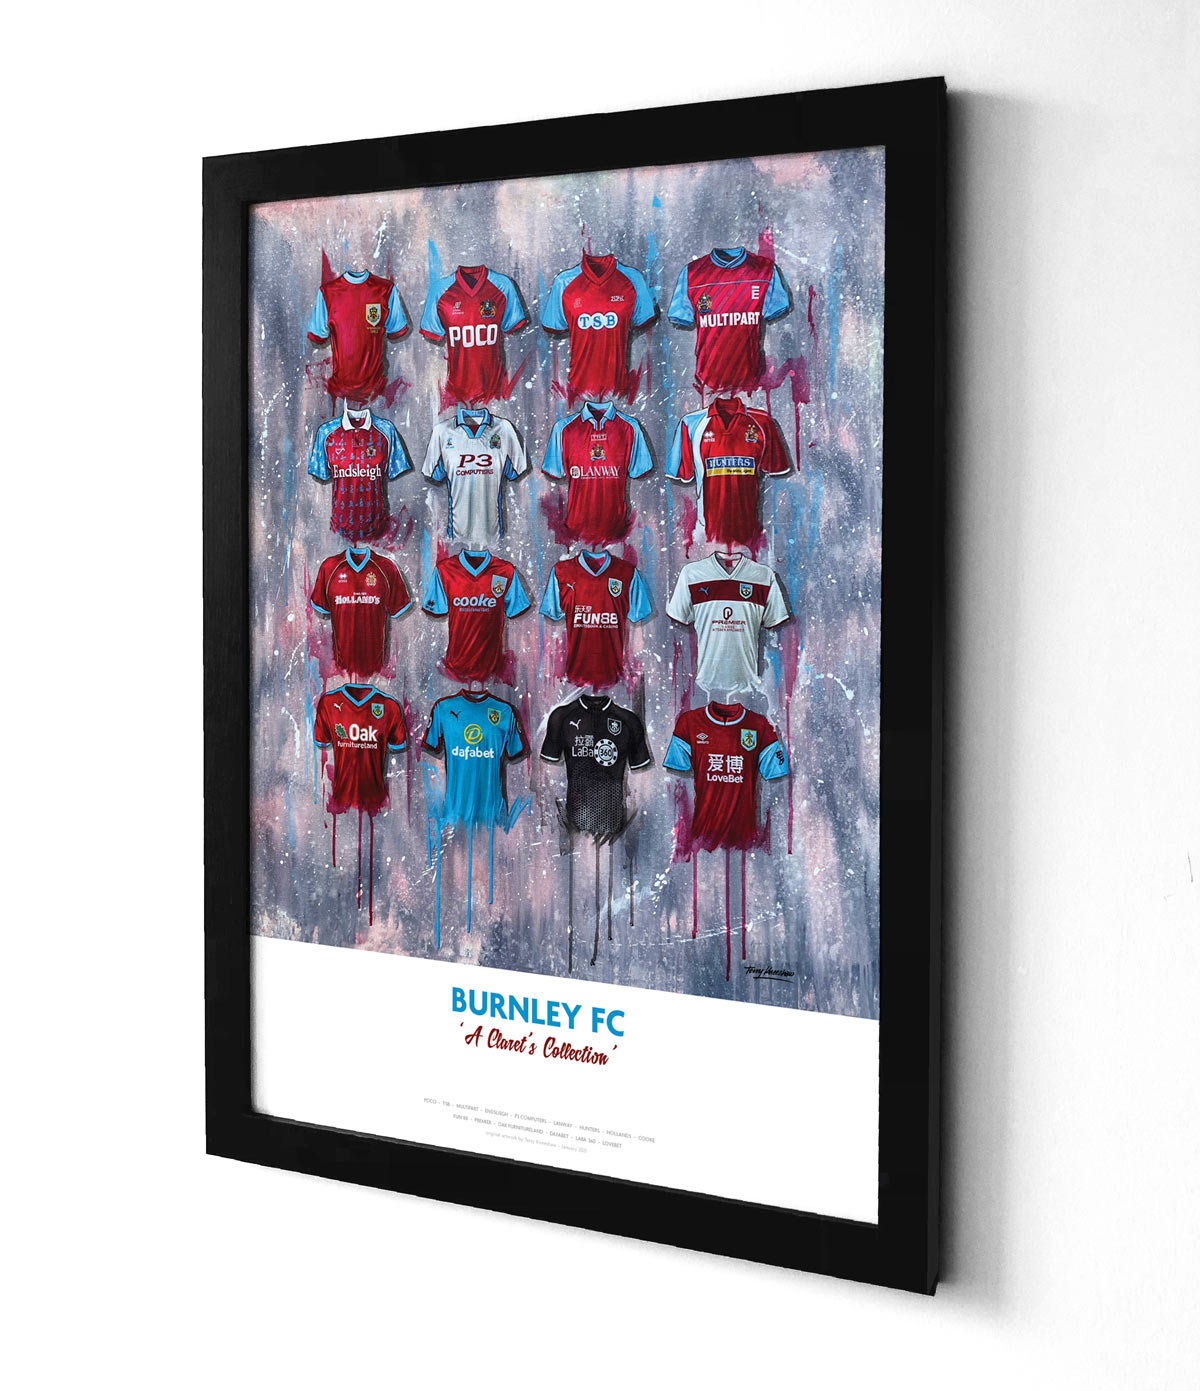 Artwork by Terry Kneeshaw depicting a collection of sixteen iconic Burnley home and away jerseys worn by the club's legends throughout their history. The kits are predominantly claret with blue accents, featuring the Burnley crest, kit manufacturer, and shirt sponsor logos on the front. The artwork is a high-quality print of a hand-painted original, which uses textured brushstrokes to create a dynamic effect.